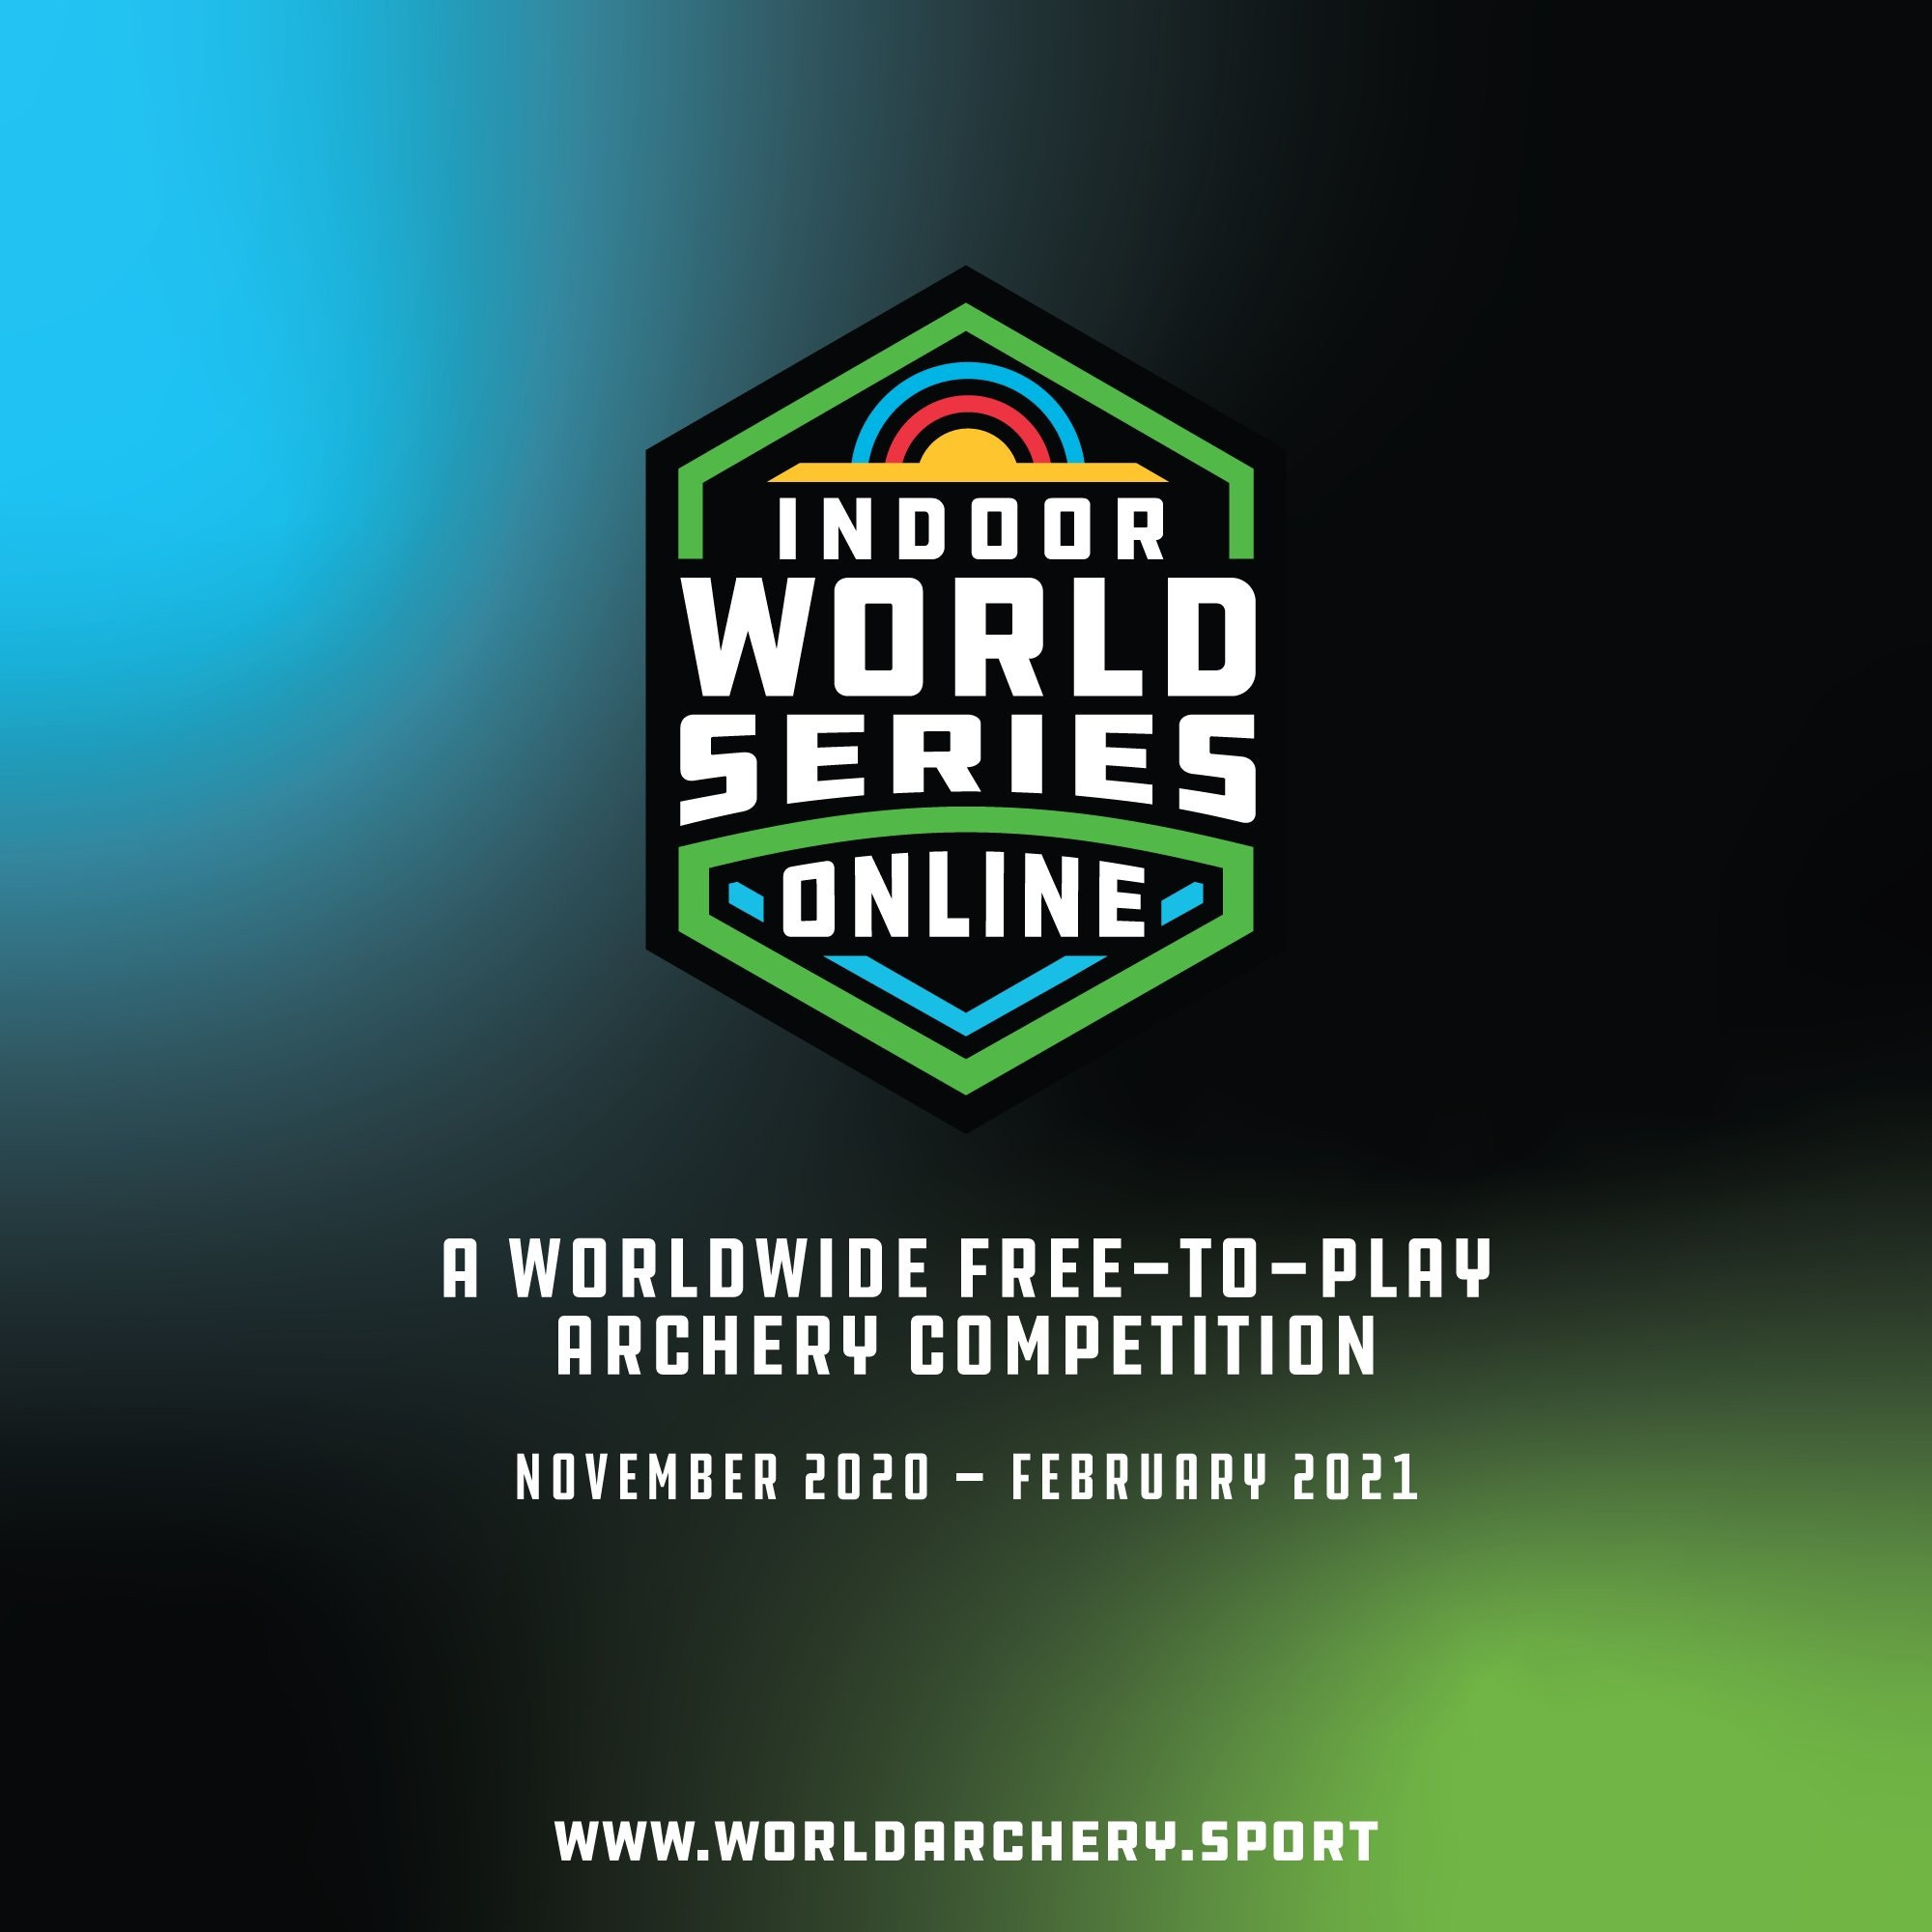 Travel restrictions force Indoor Archery World Series to go virtual